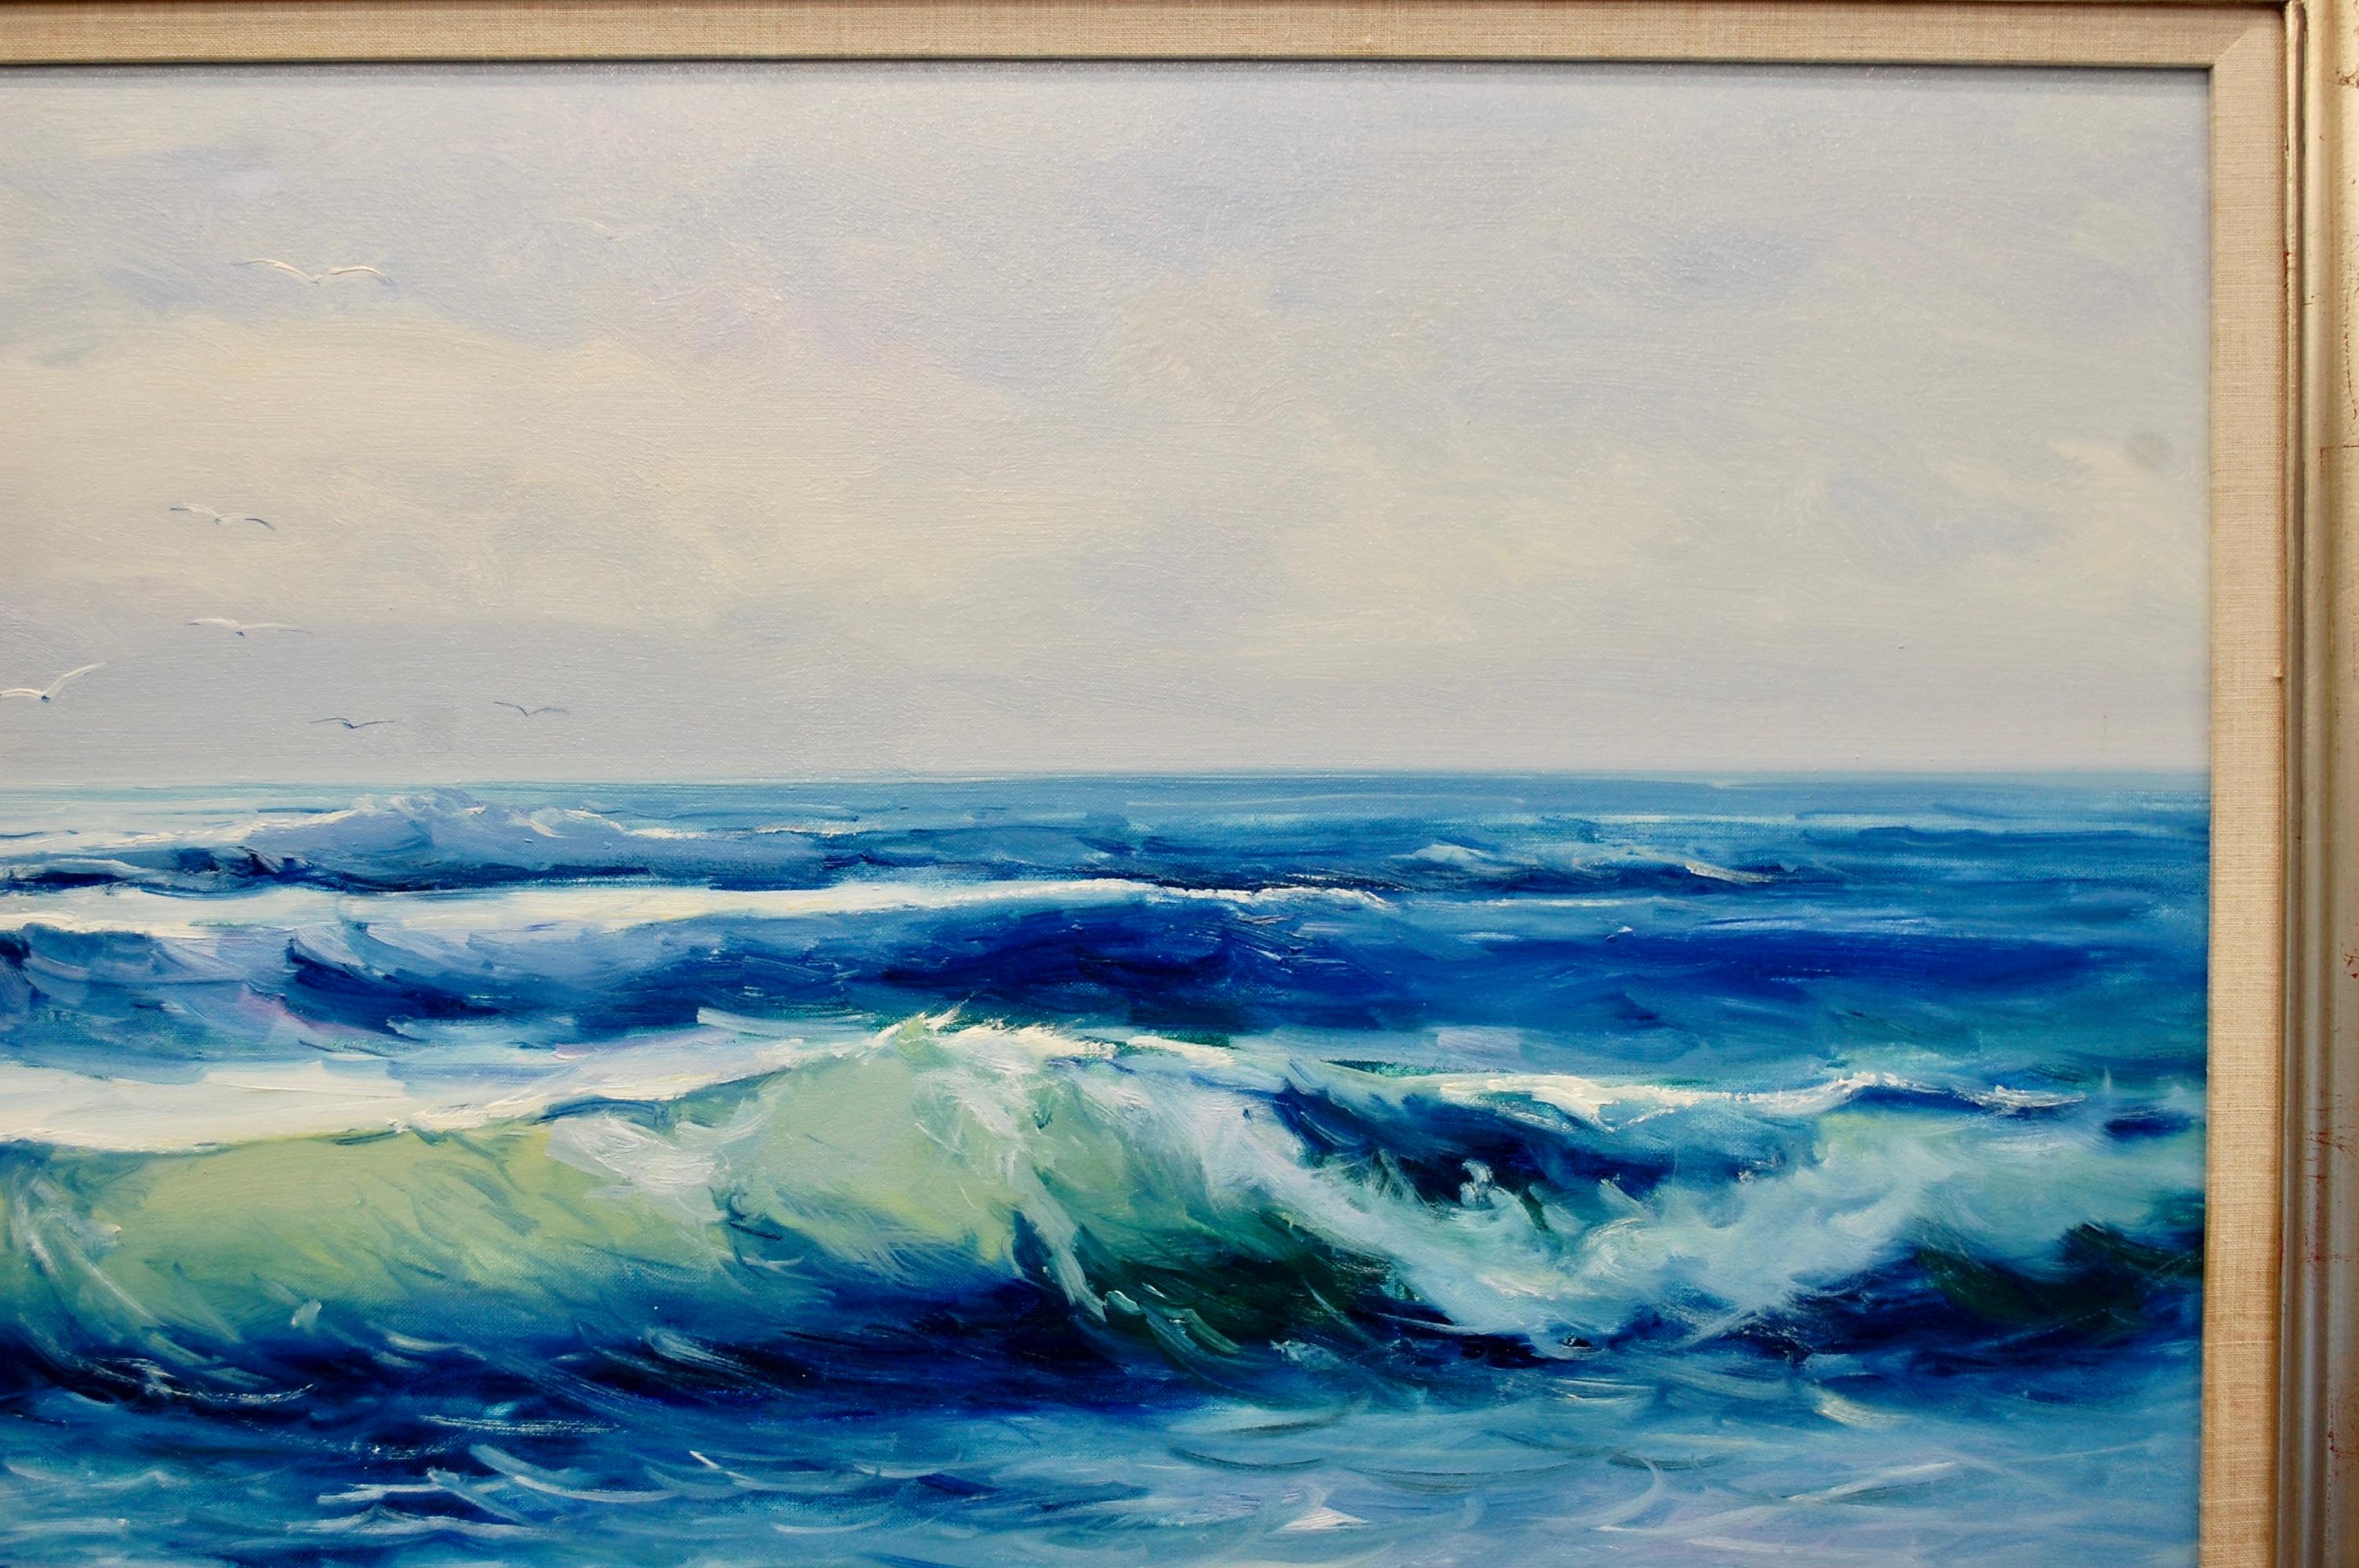  Seascape Contemporary Oil Painting
Artist signed, silver wood frame.
Joan Segrelles was born in Barcelona, Spain in 1960. He studied at the Bellas Artes School in his home town where he discovered different techniques, materials and methods. His